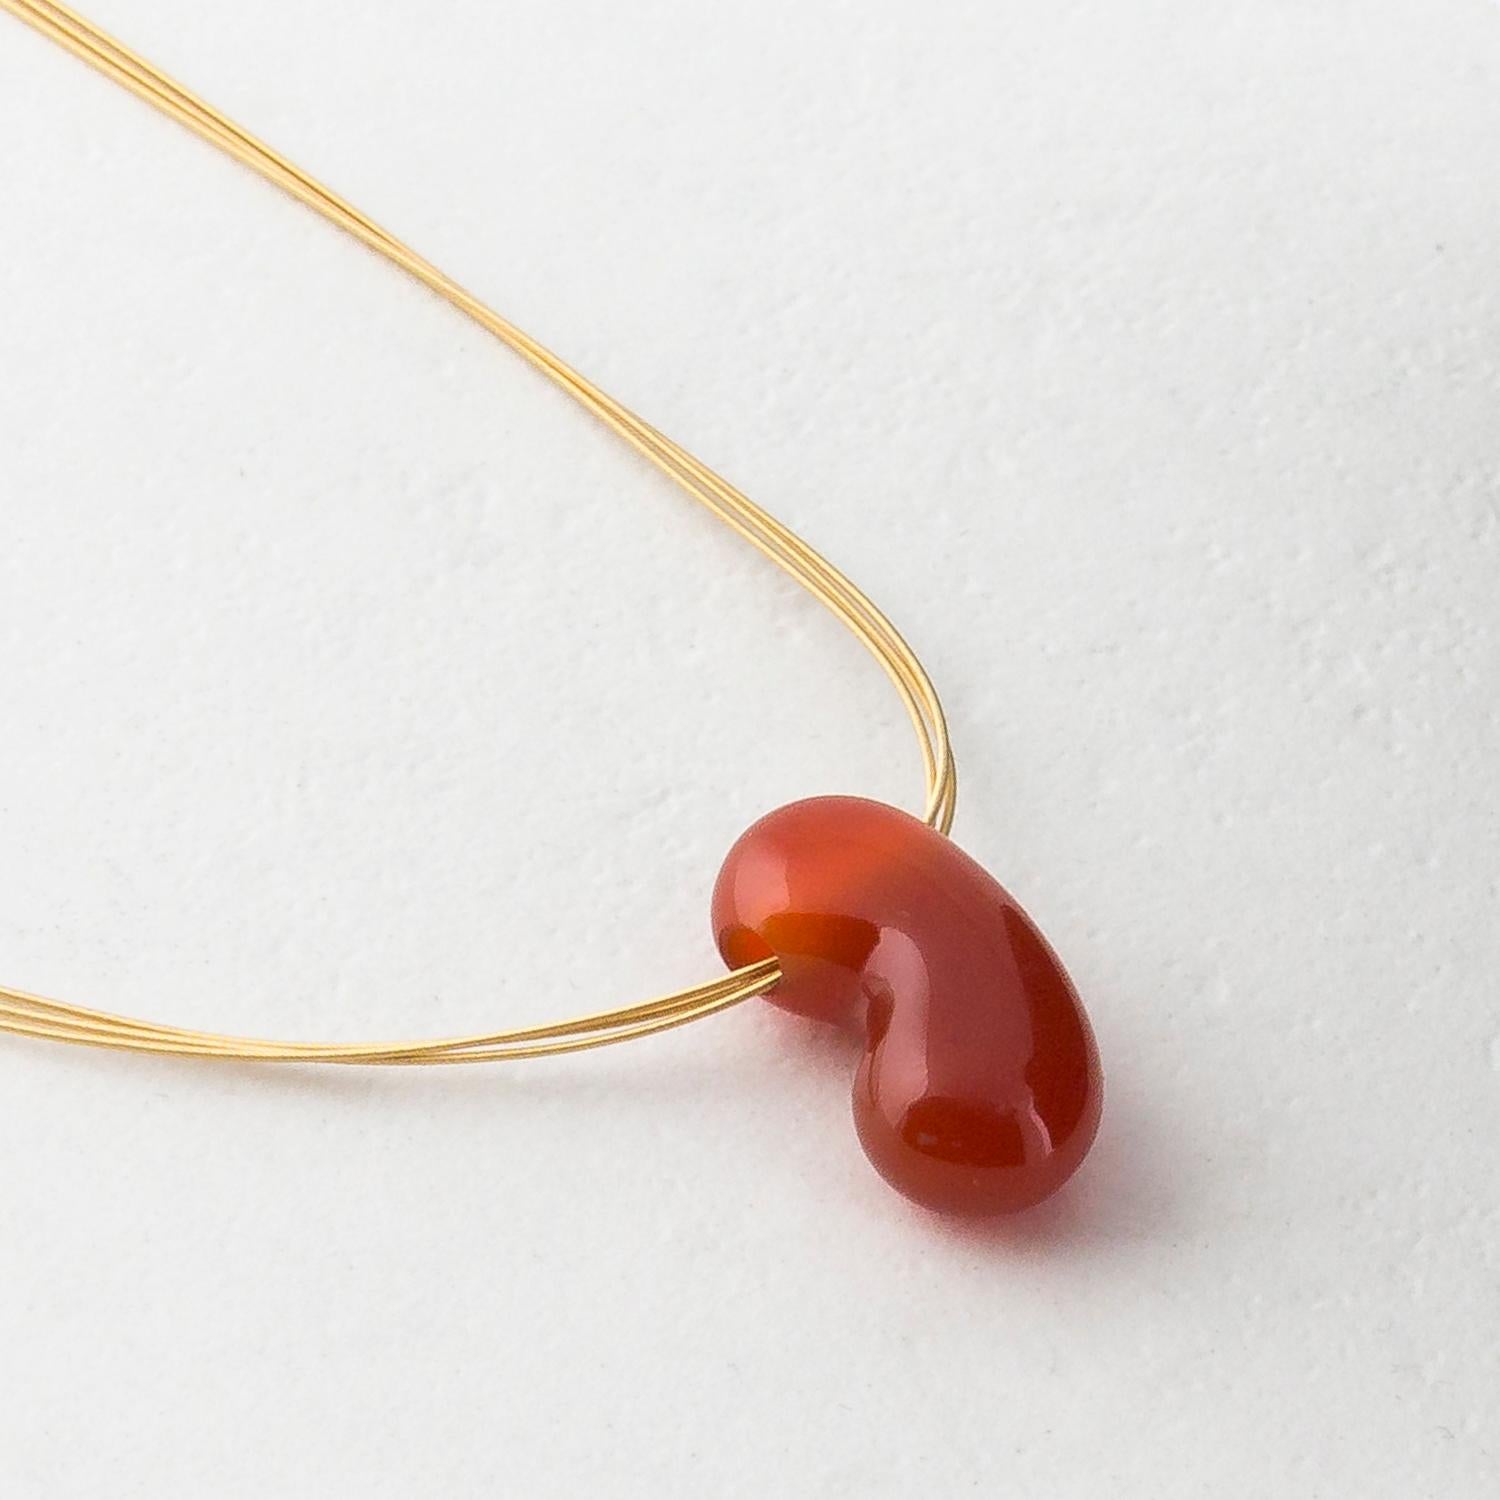 Hand-carved by Dieter Lorenz, one of the top names in contemporary gem-carving, this Carnelian jellybean pendant is hung on an 18 Karat Yellow Gold multi strand necklace.

Made by hand in our family run Northern Irish jewellery workshop. Inspired by